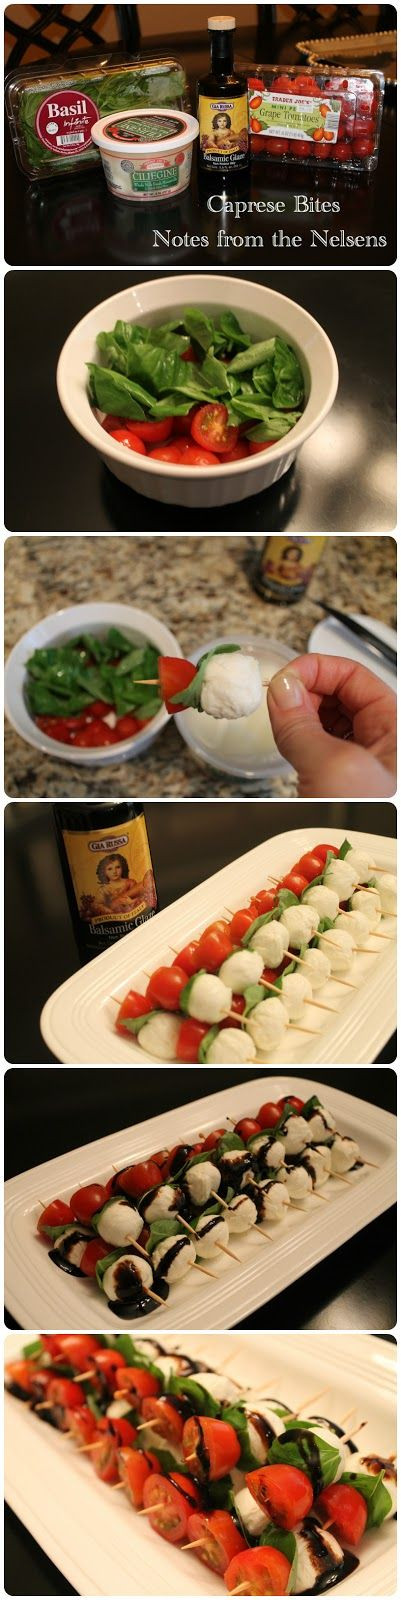 Healthy Appetizers For Potluck
 25 best ideas about Healthy potluck on Pinterest